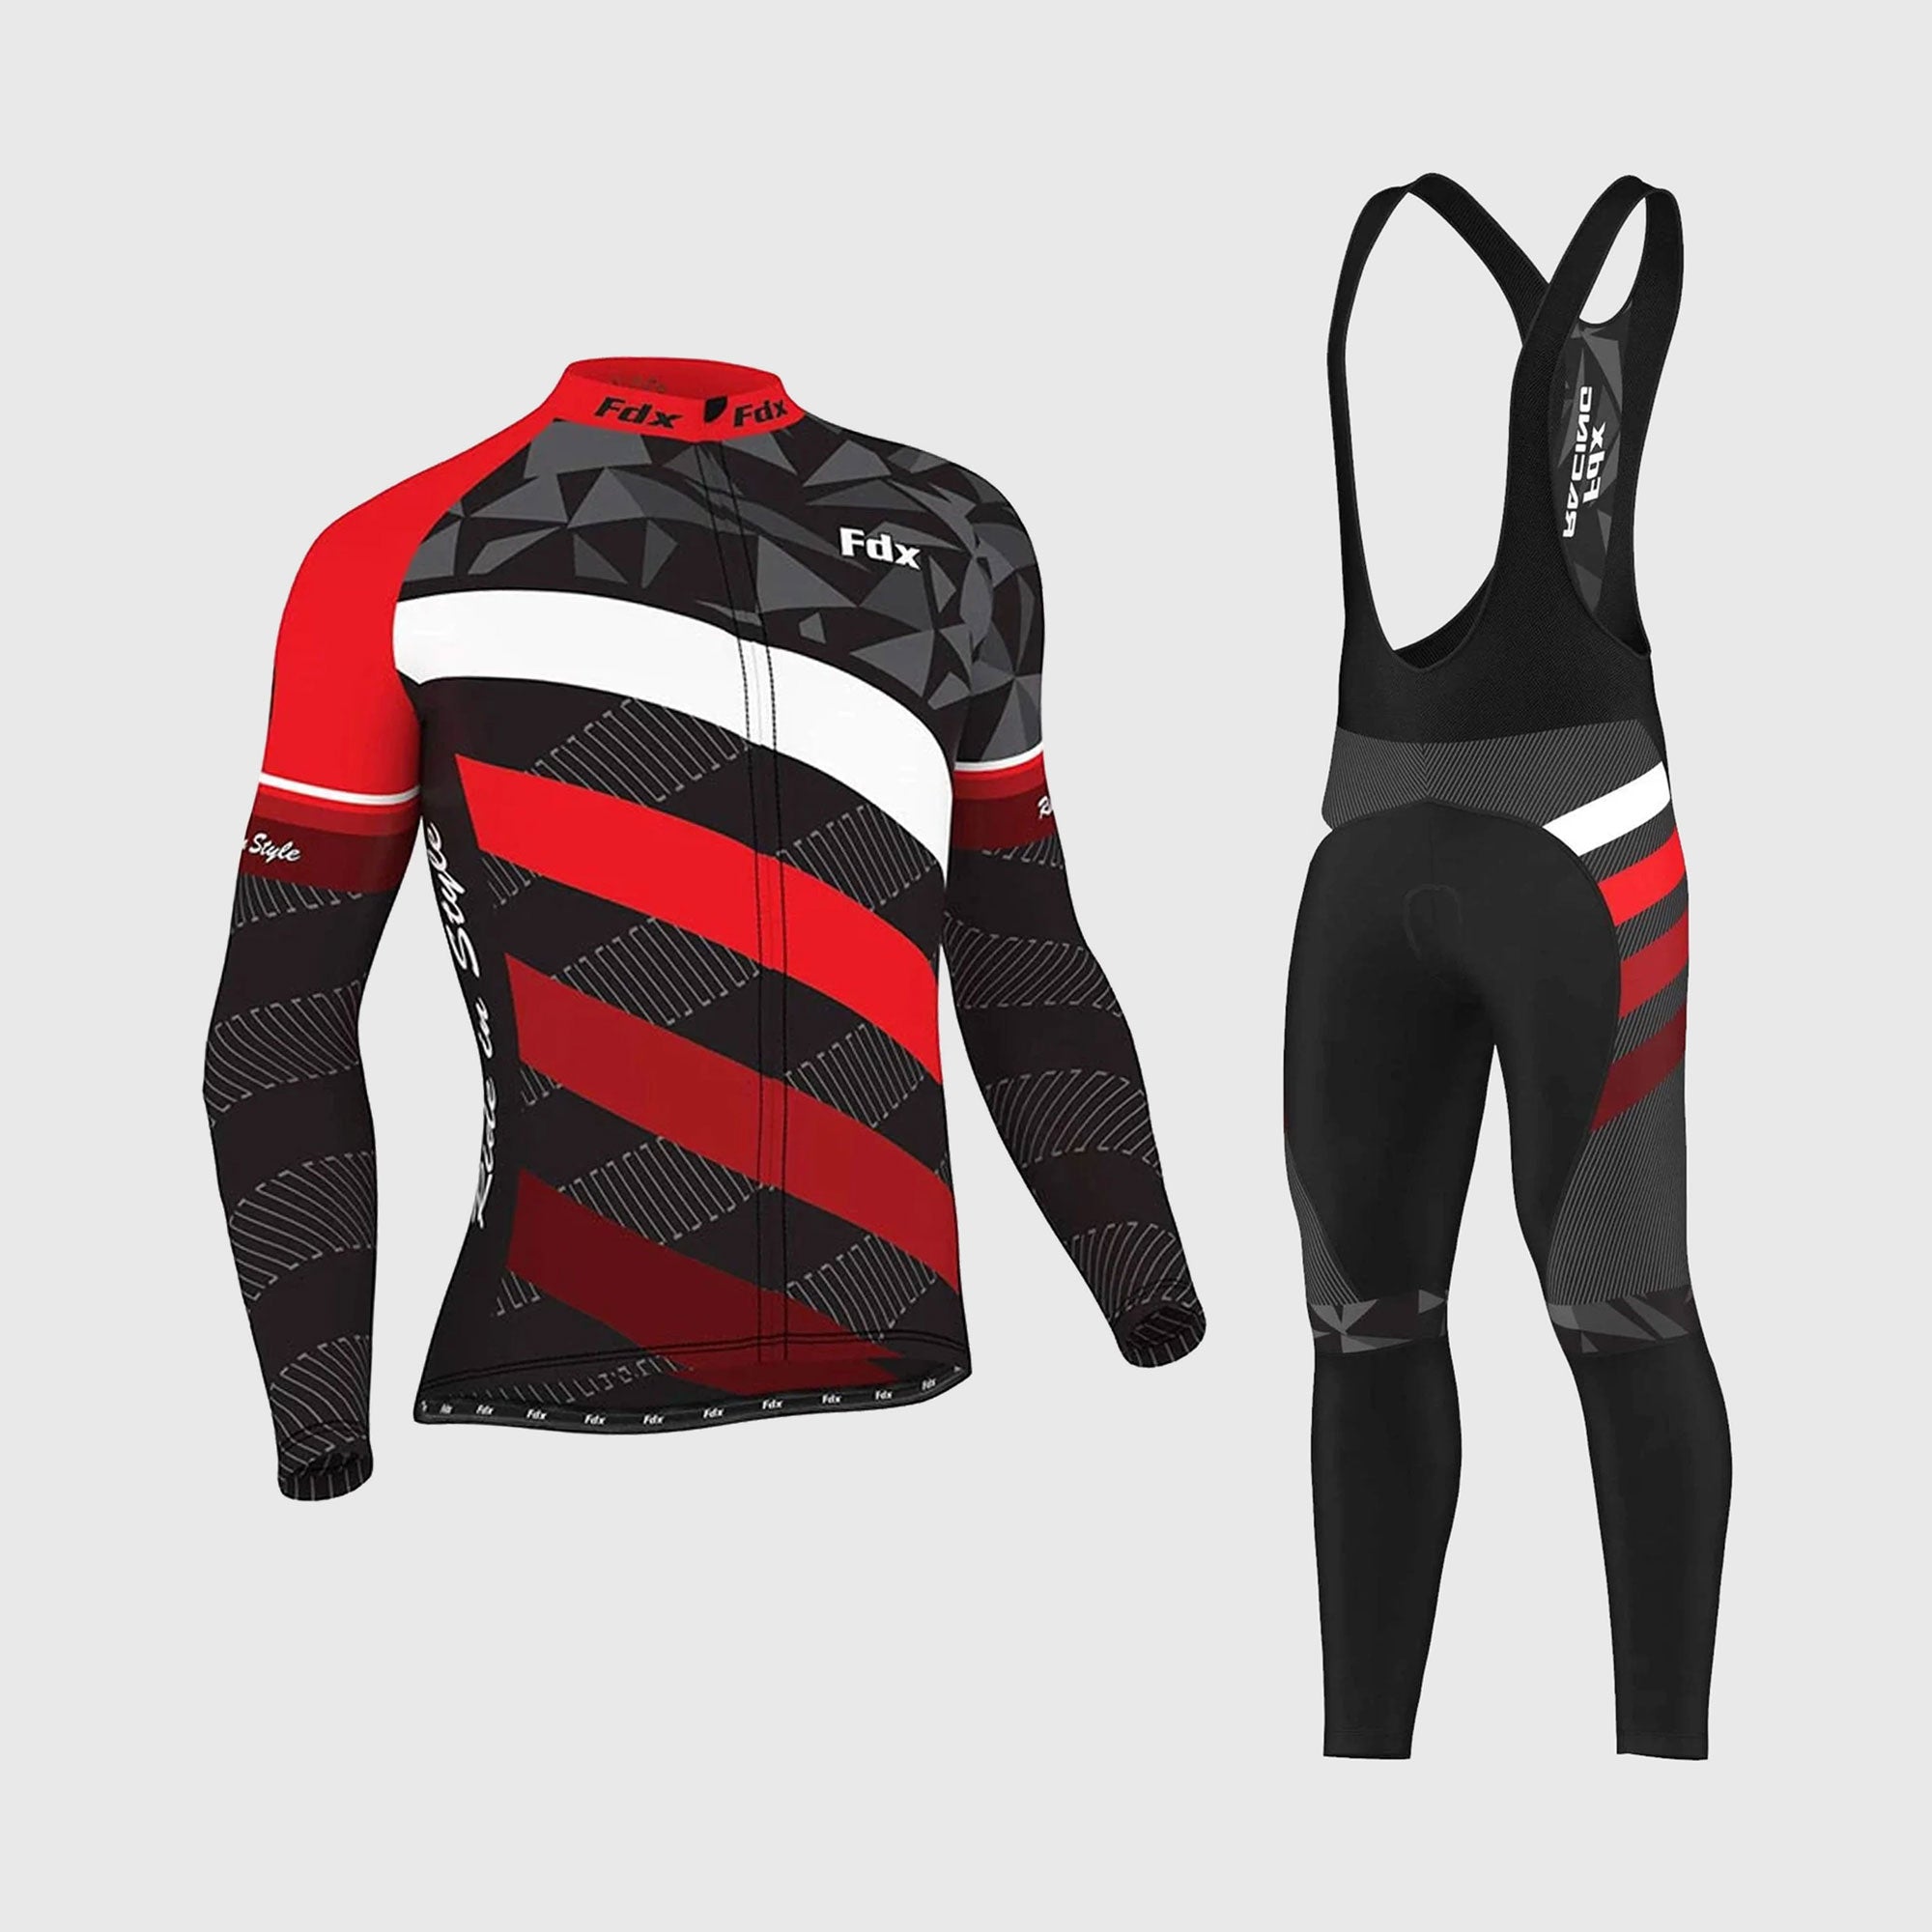 Fdx Men's Set Equin Thermal Roubaix Long Sleeve Cycling Jersey & Bib Tights - Red